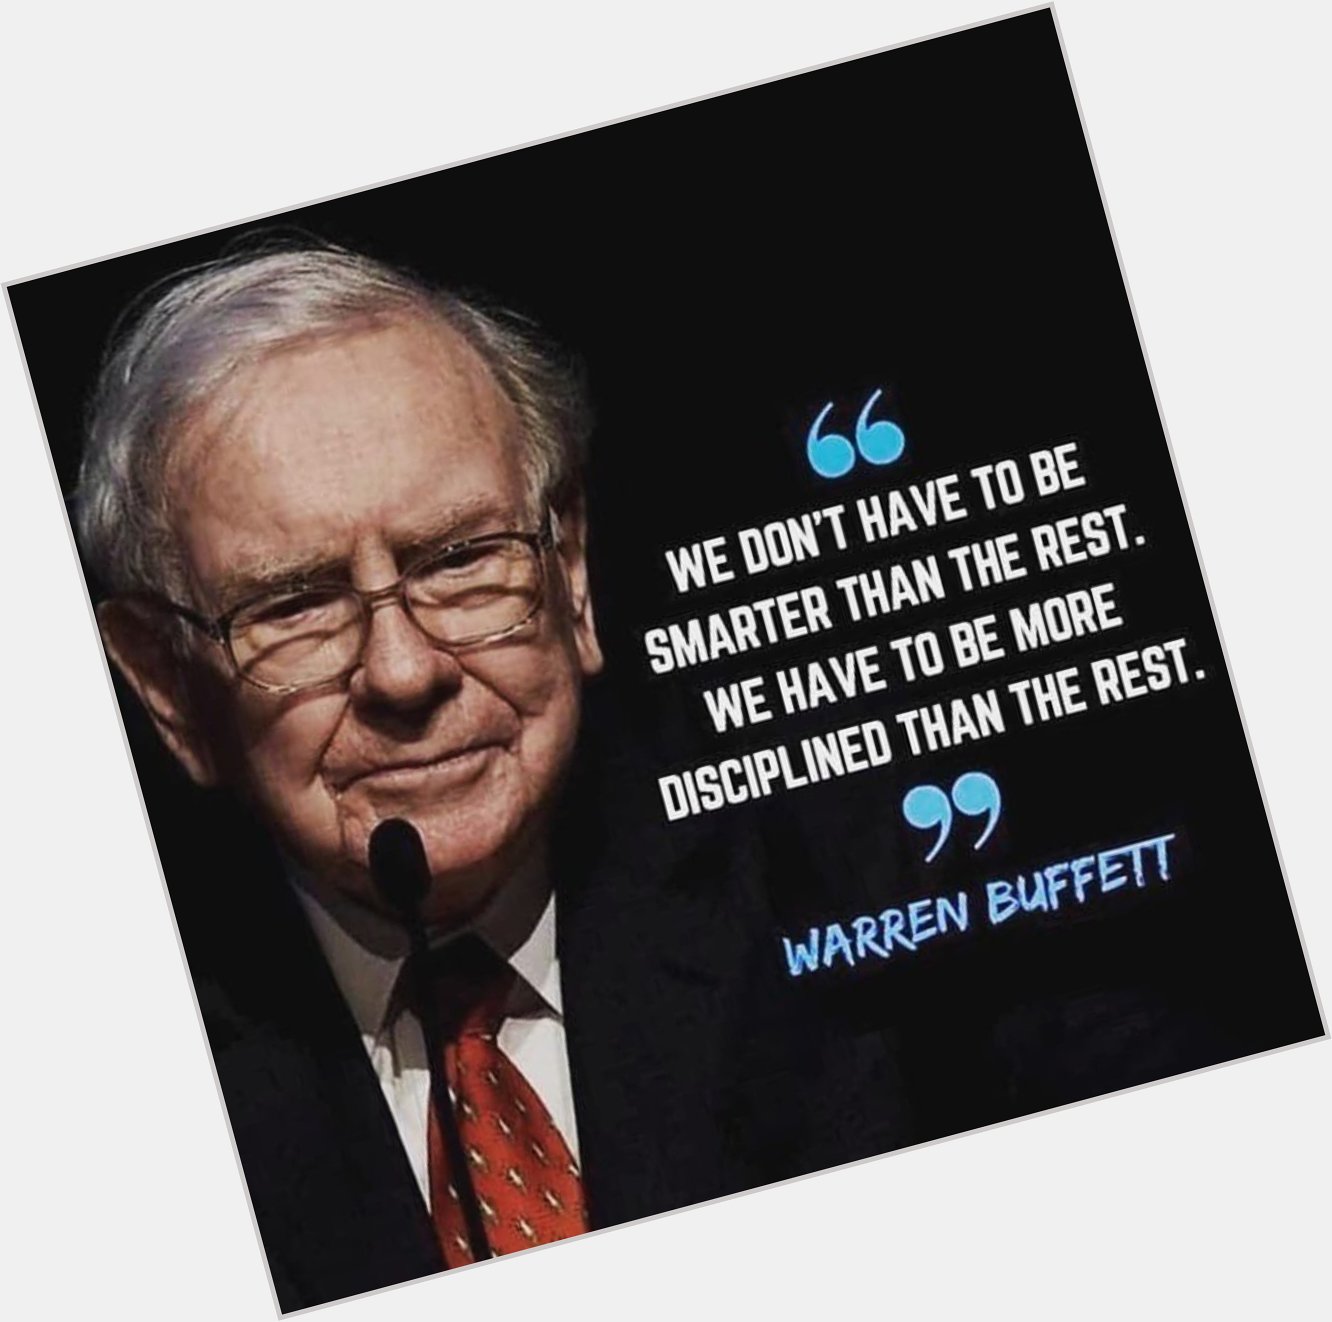 \"Price is what you pay
Value is what you get\"

Happy Birthday Warren Buffett. 